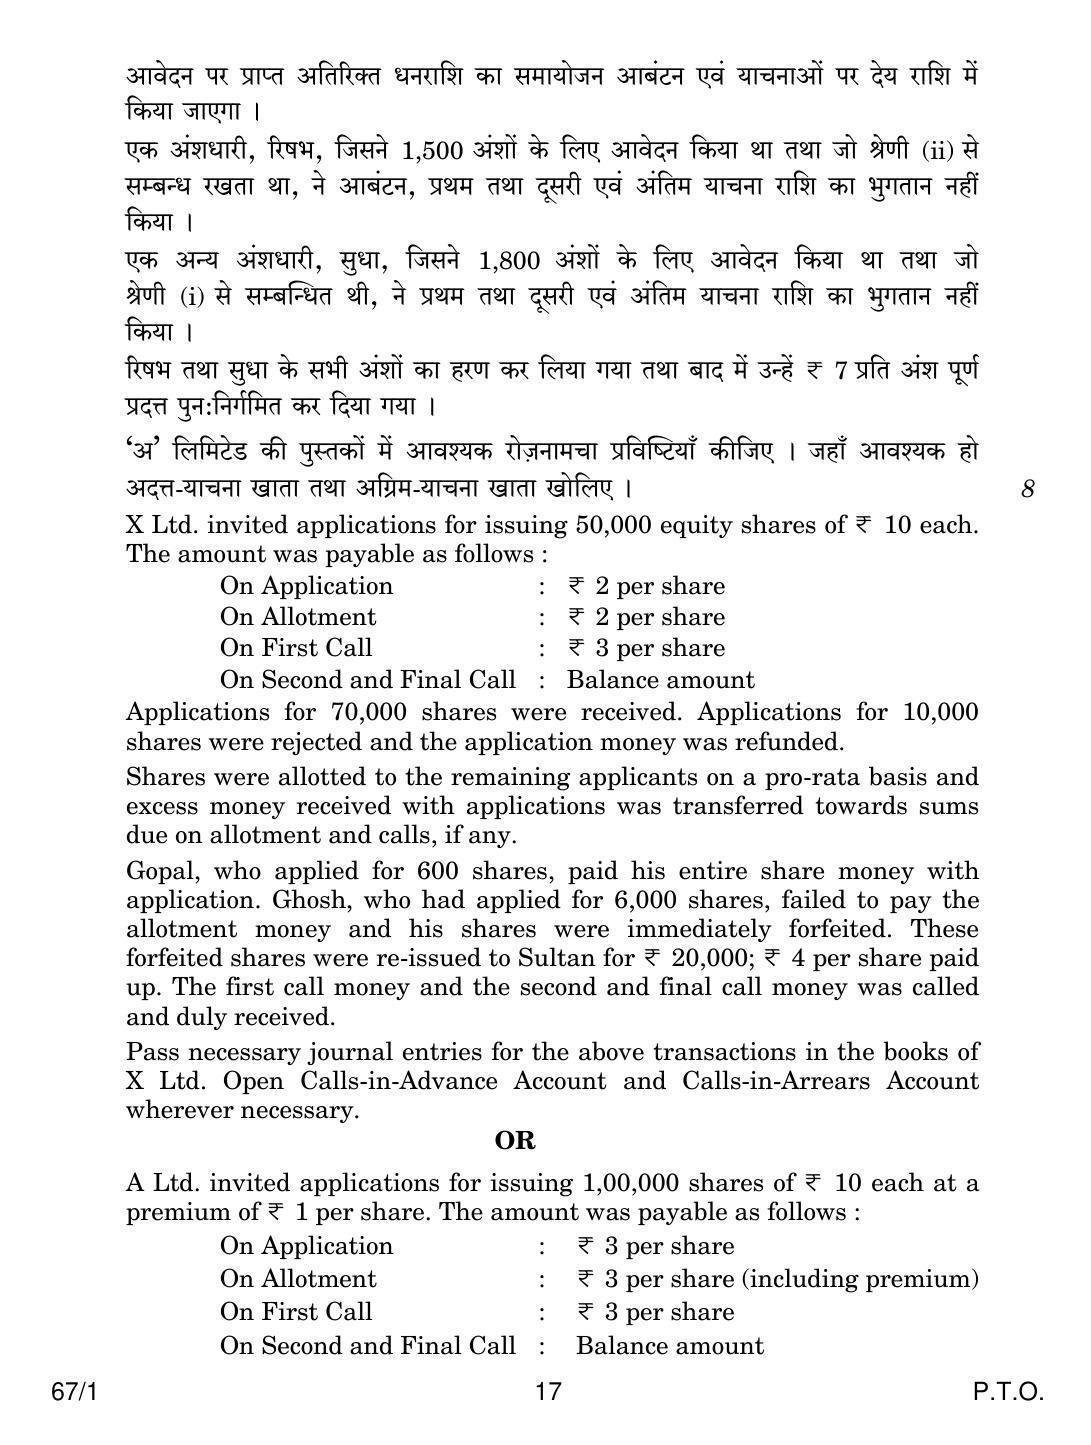 CBSE Class 12 67-1 ACCOUNTANCY 2018 Question Paper - Page 17